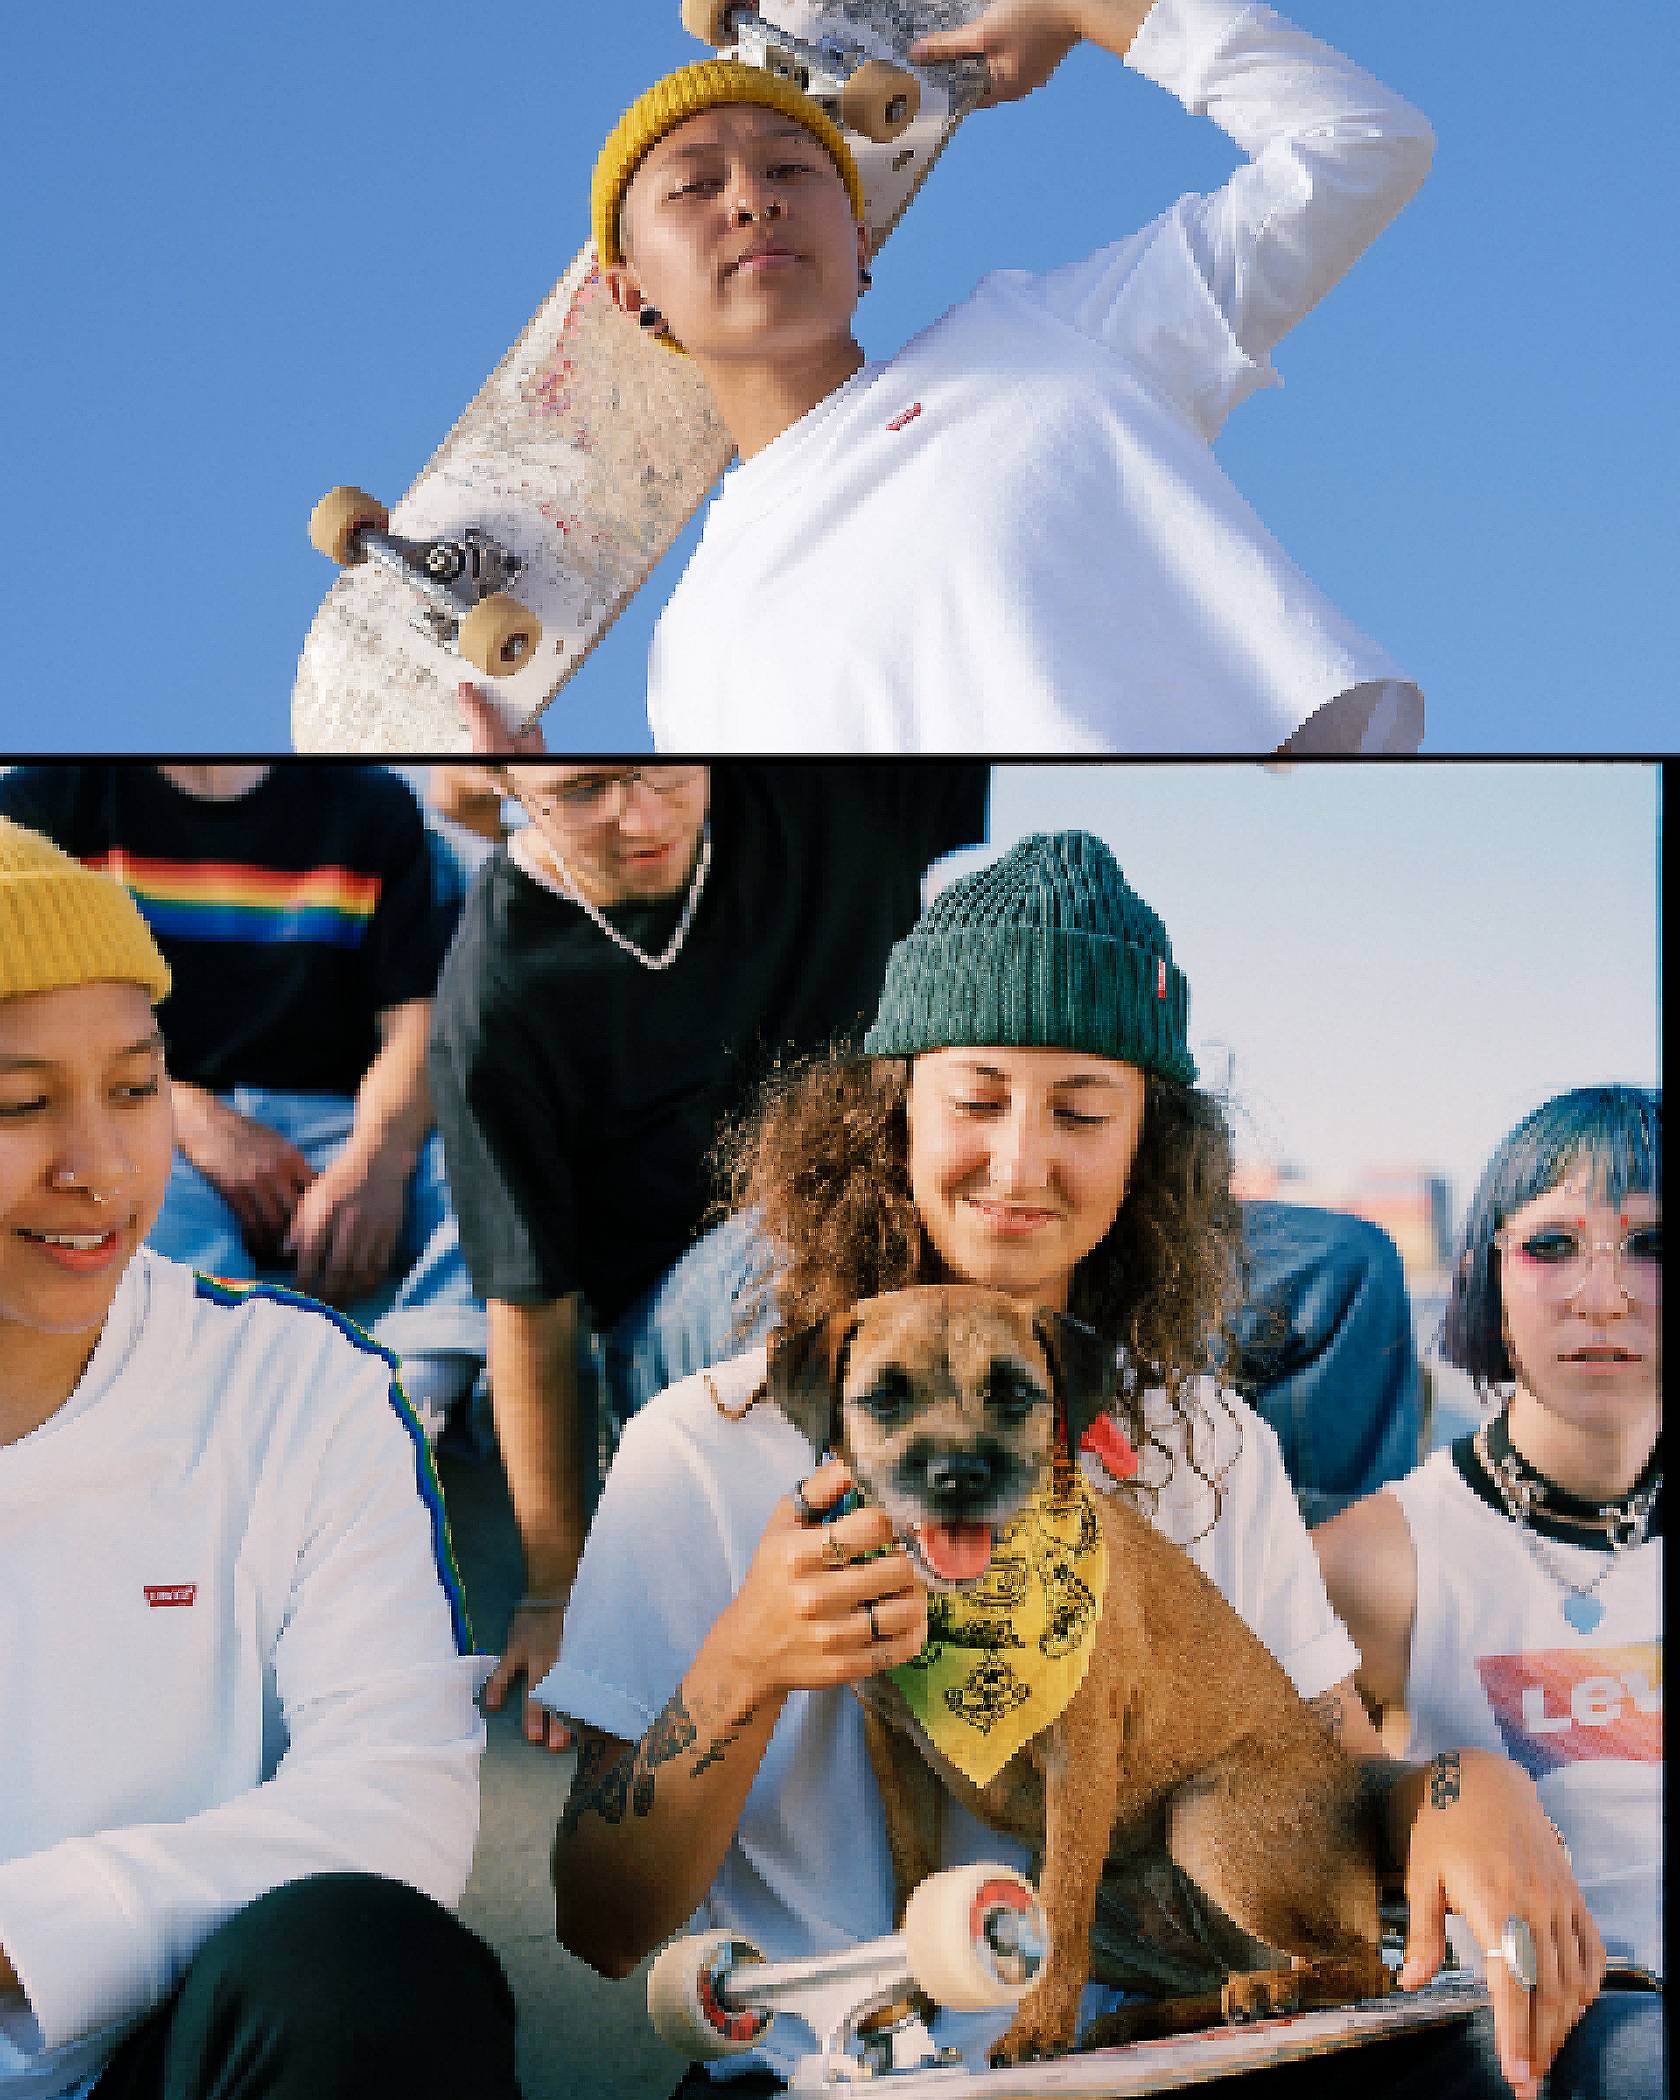 A photo of someone holding a skateboard and a group of shot of three individuals with one holding a dog